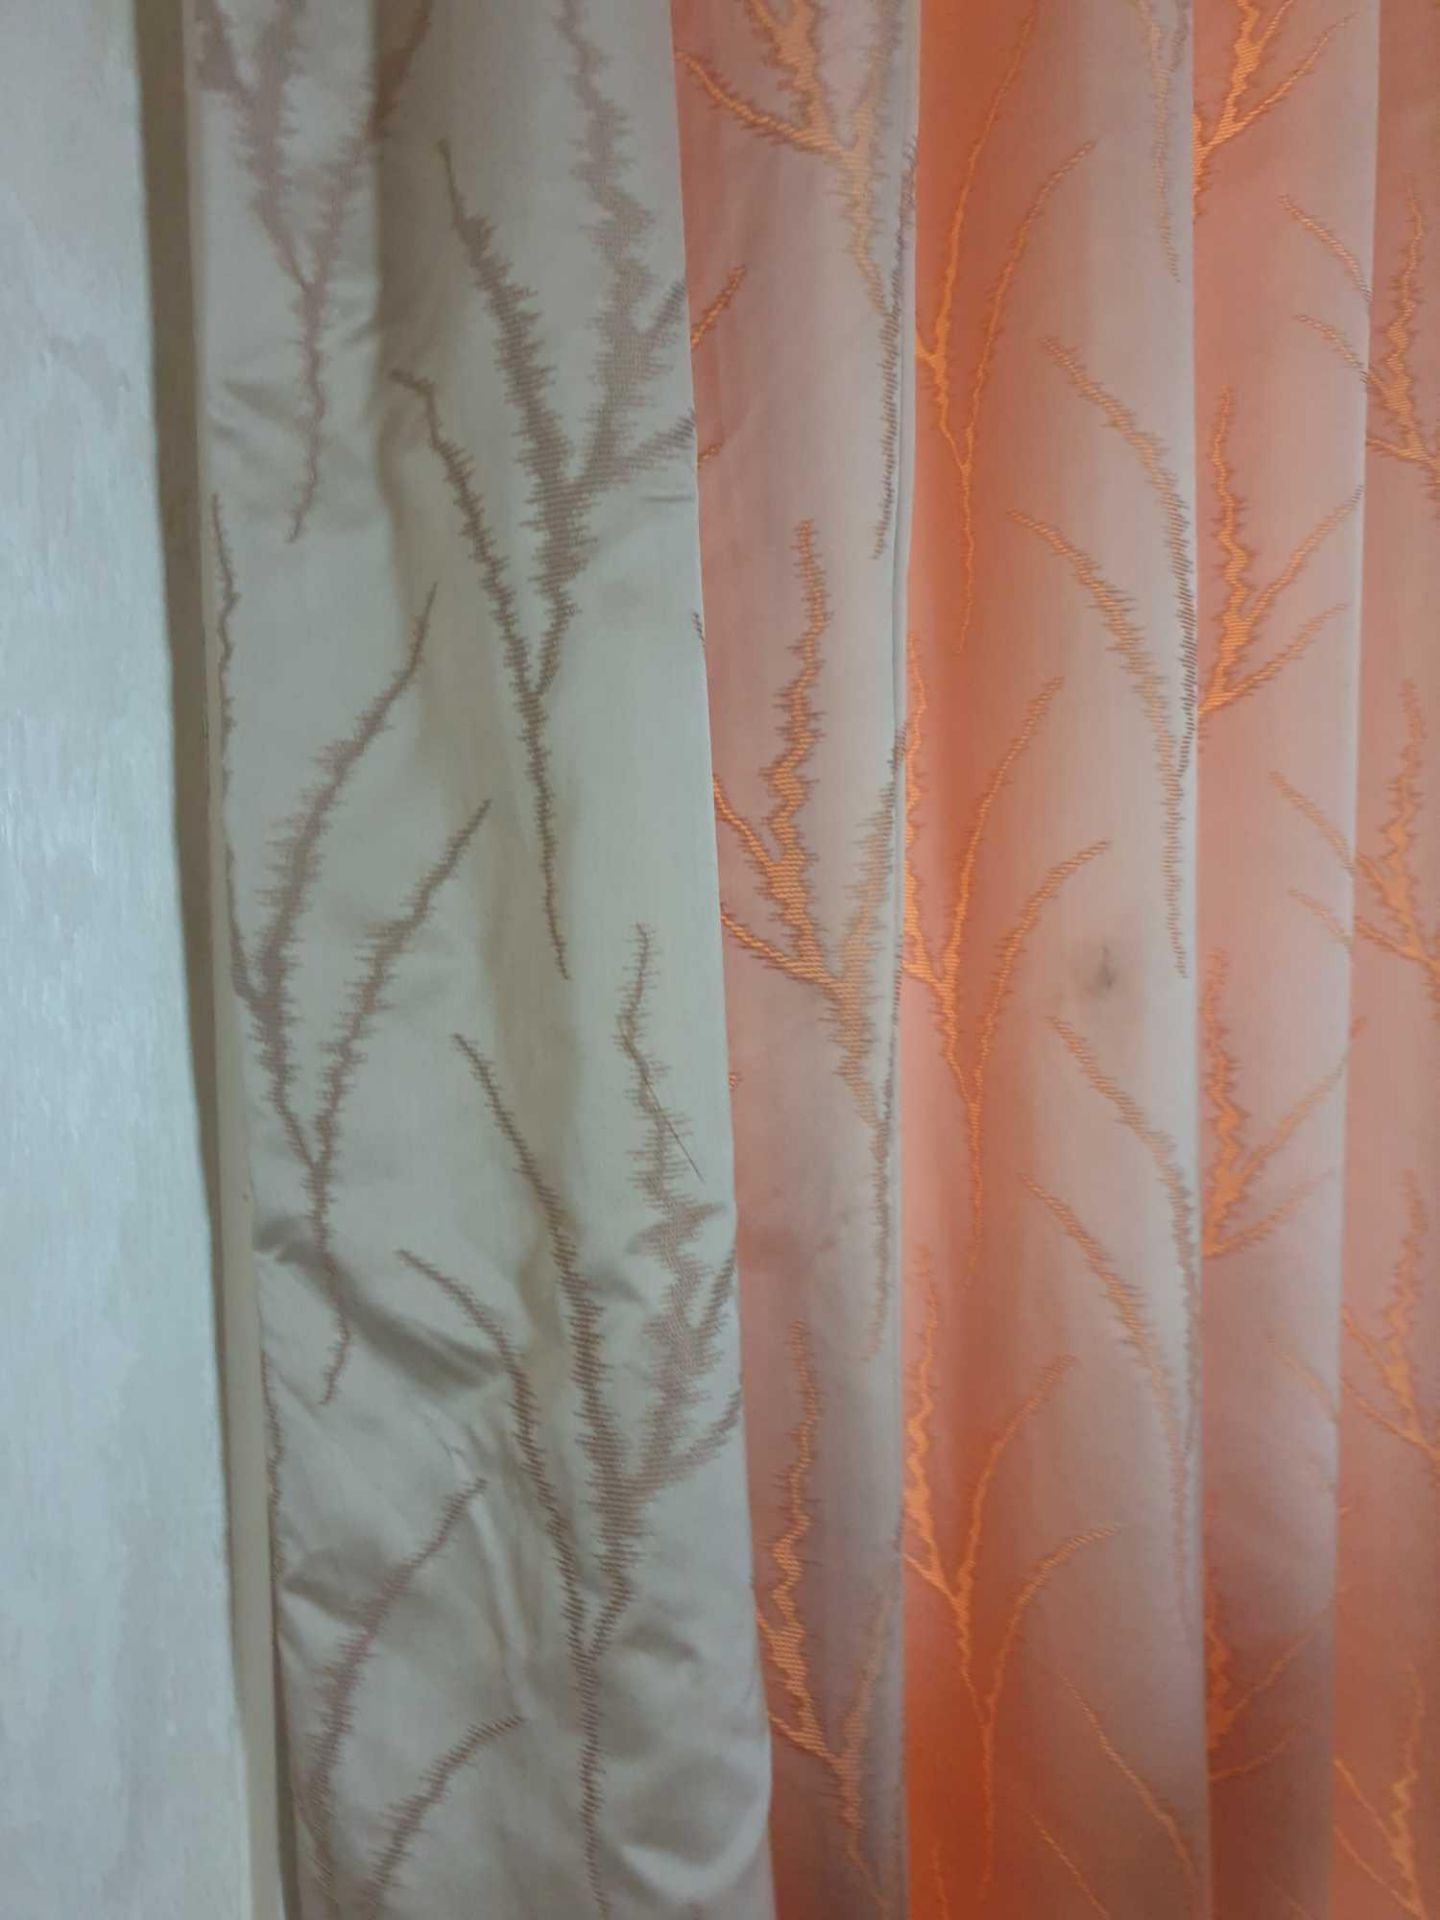 A Pair Of Silk Drapes And Pelmet Gold With A Branch Embroidery 250 x 270cm (The Audley ) - Image 2 of 3